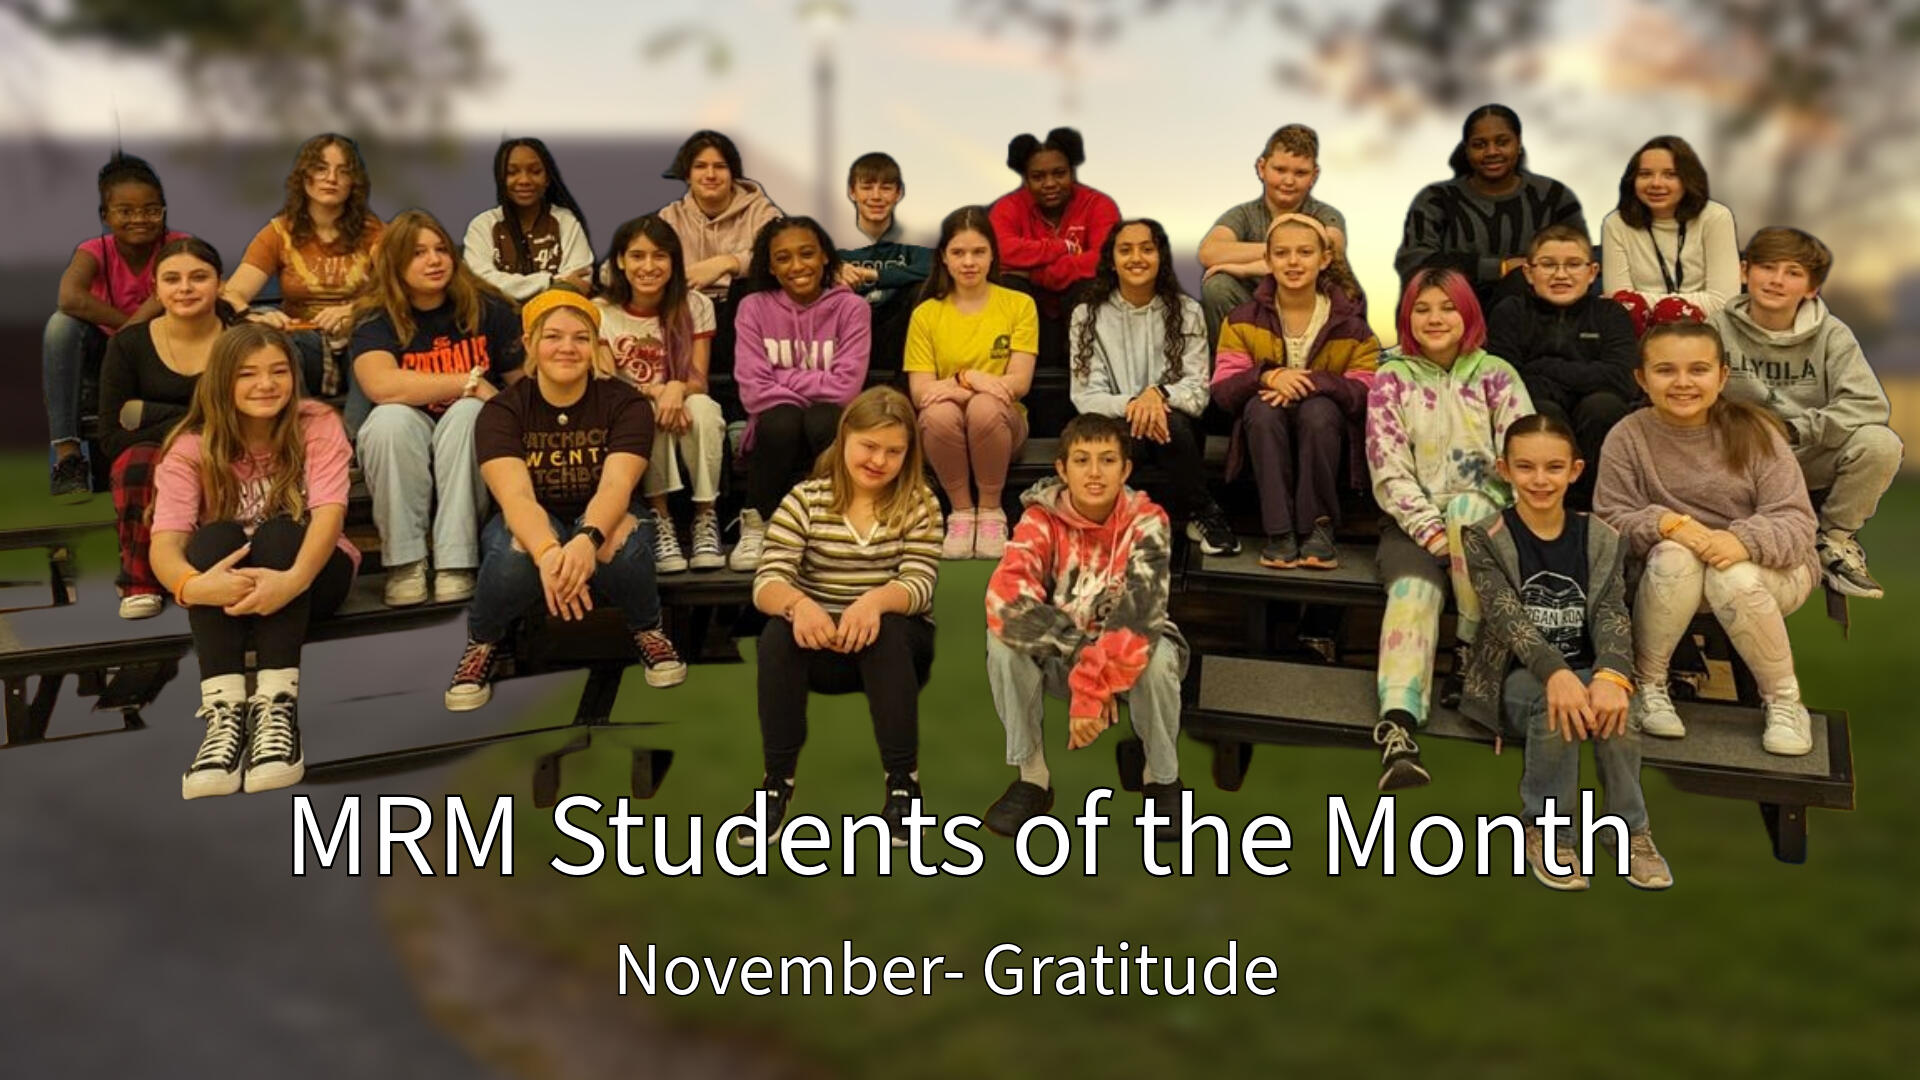 MRM Students of the Month - Gratitude